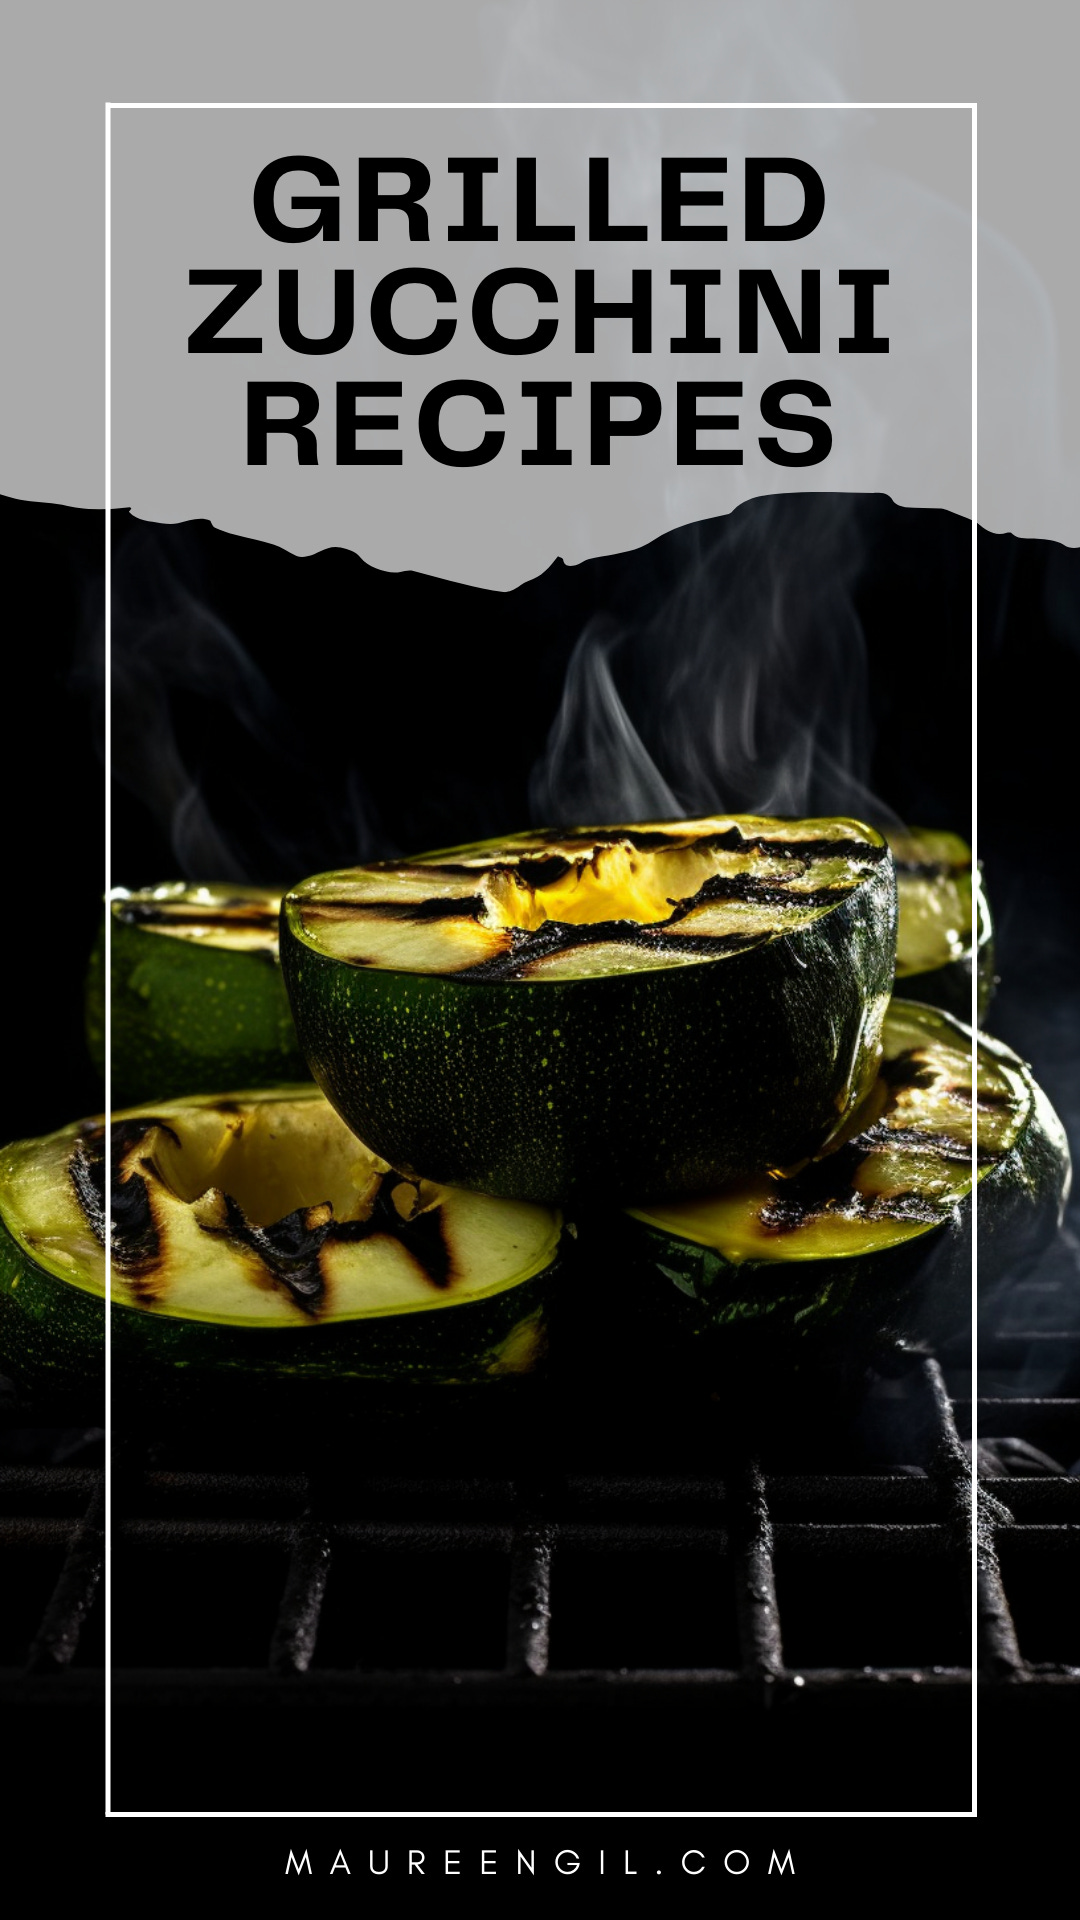 Looking for delicious and healthy ways to cook zucchini and yellow squash? Check out these easy grilled recipes that are perfect for summer!